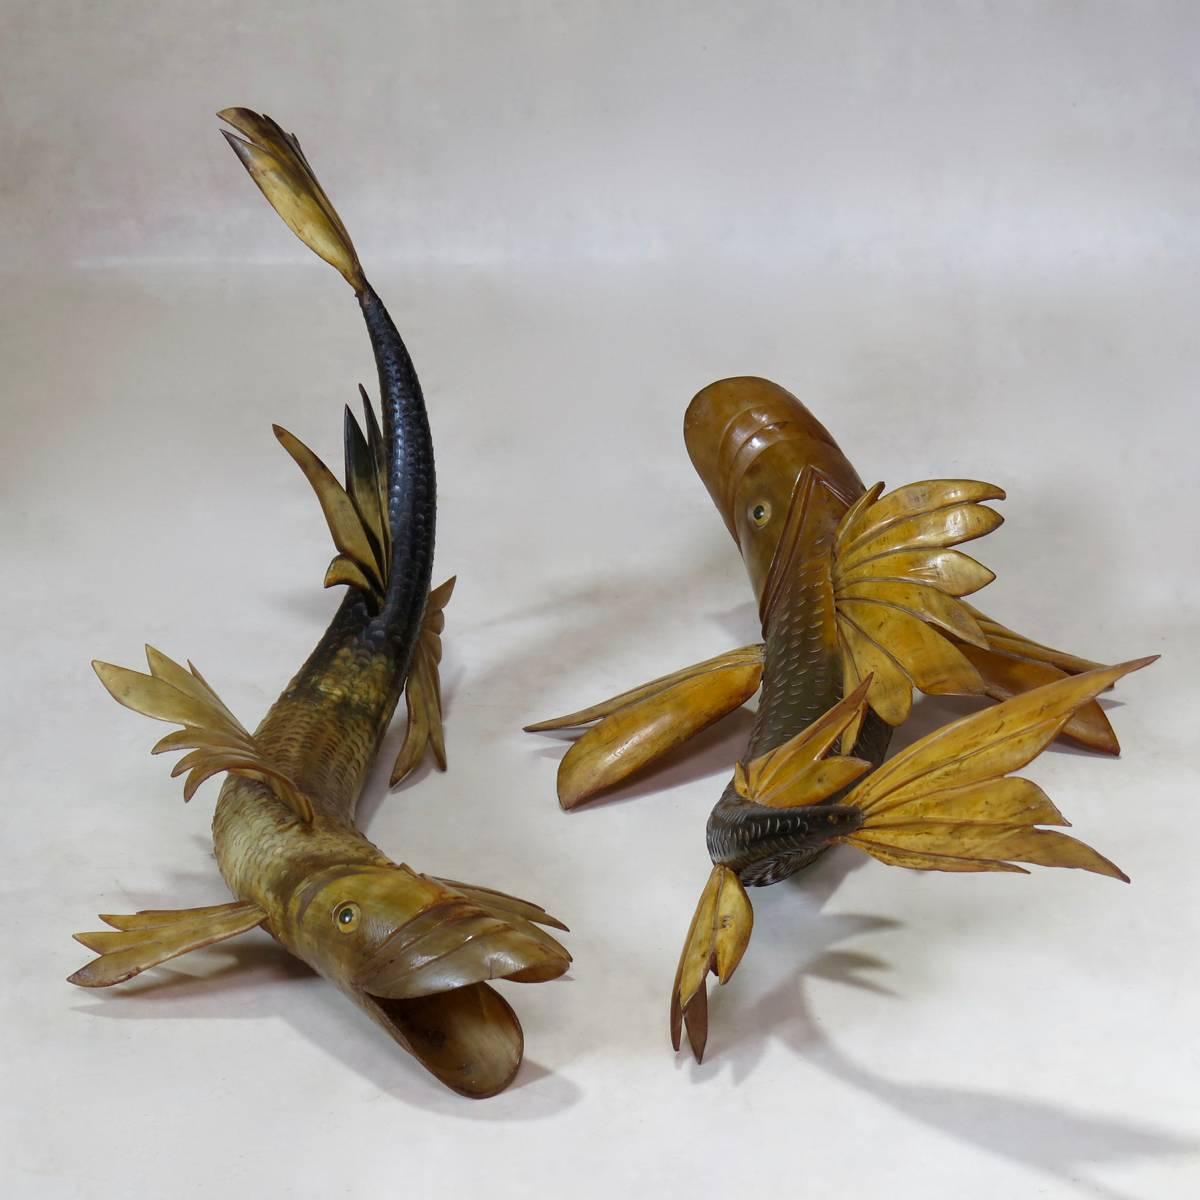 Fun and unusual pair of fish sculptures hand-fashioned out of a large pair of bull horns. Very decorative. Could also be made into lamps.